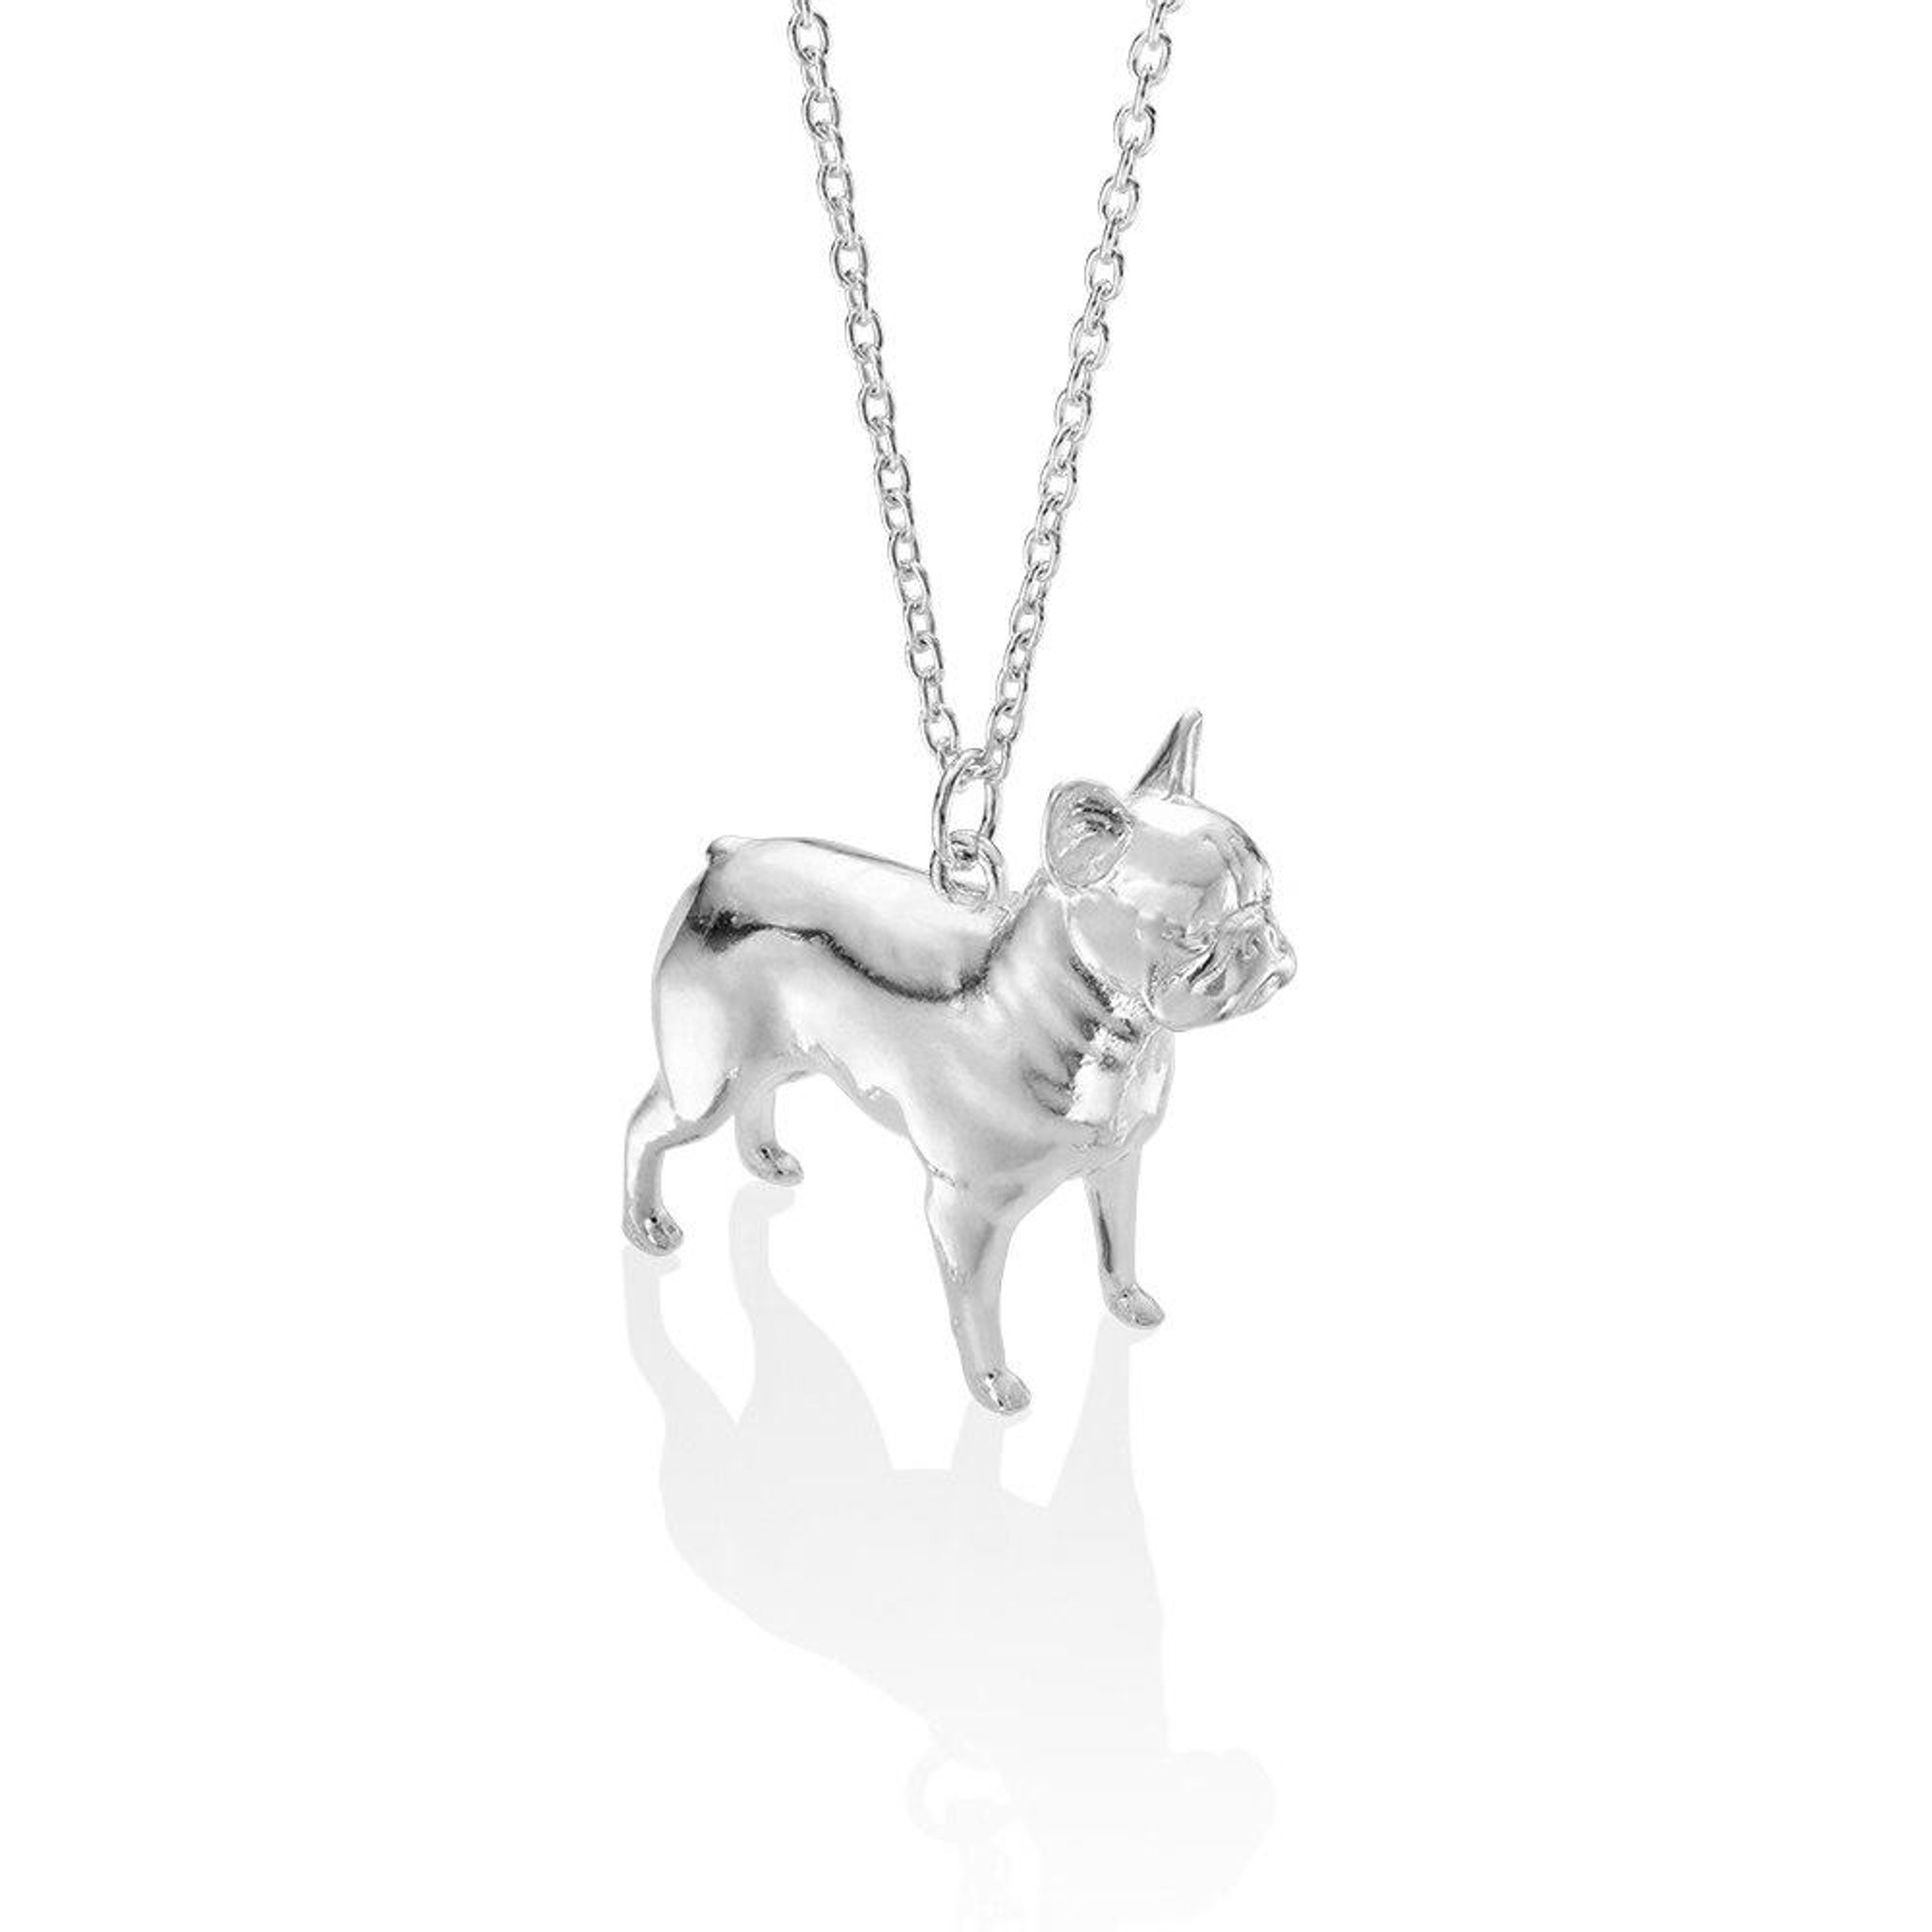 Allergy free - dog with a diamond necklace - french bulldog - Shop  misswudesign Necklaces - Pinkoi